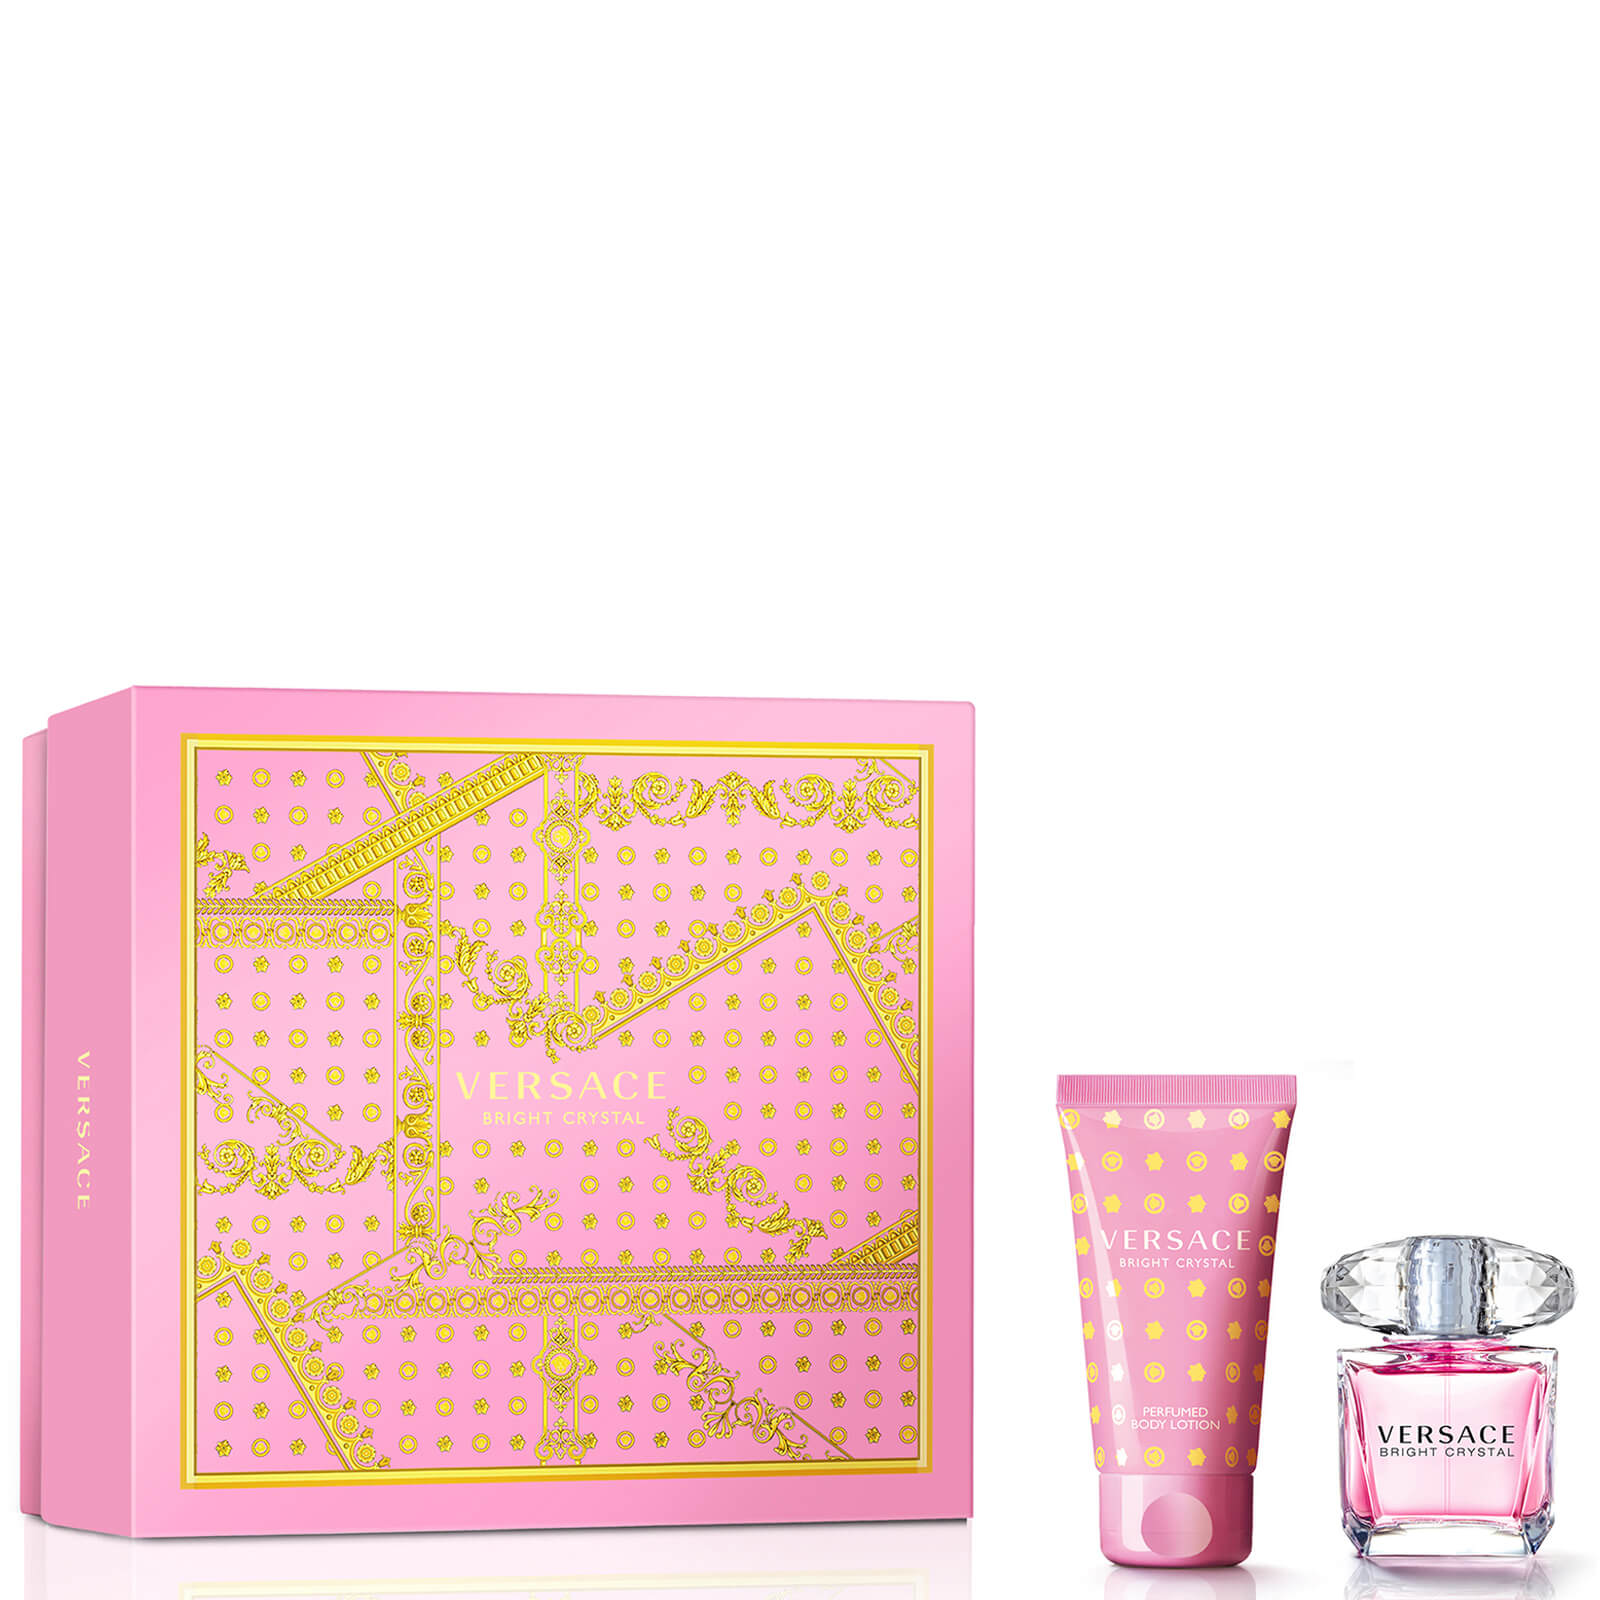 Versace Bright Crystal X17 EDT 30ml Coffret with Body Lotion